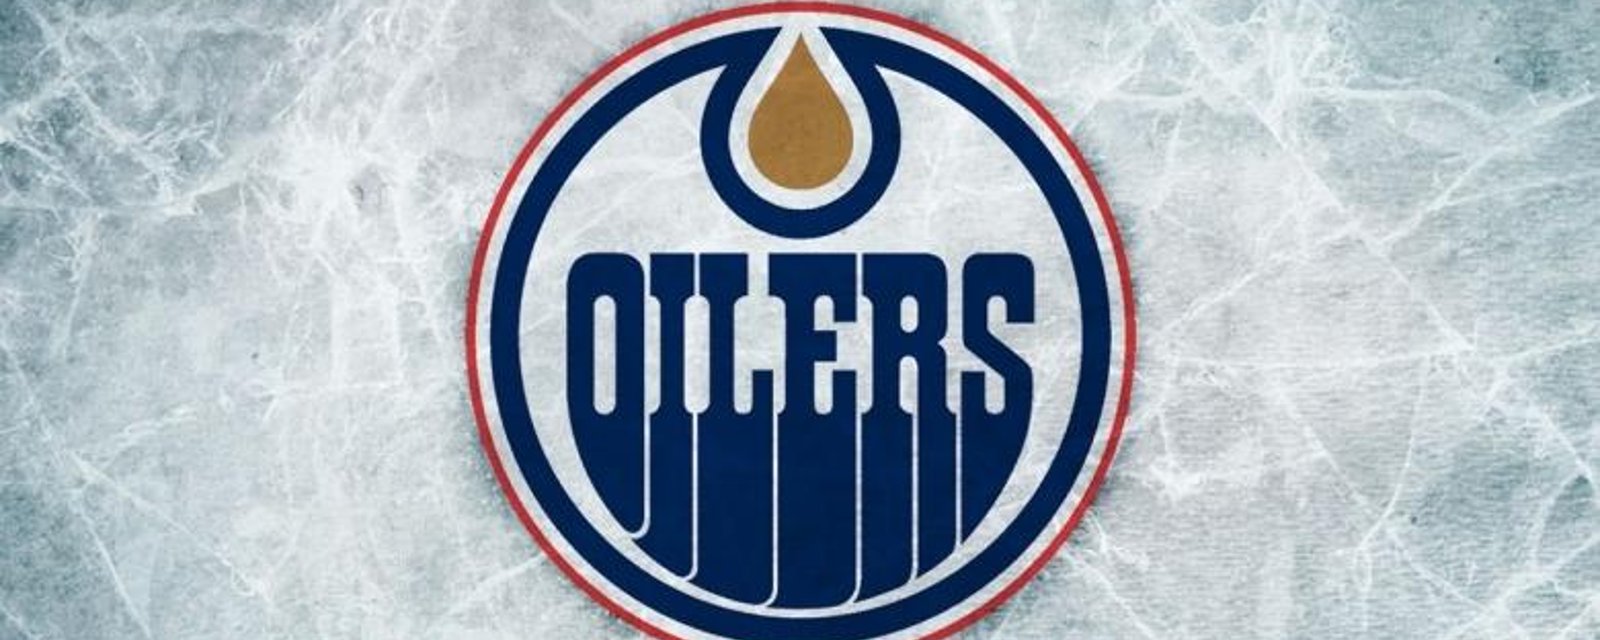 Report: Oilers attempted to trade one of their former first overall picks.